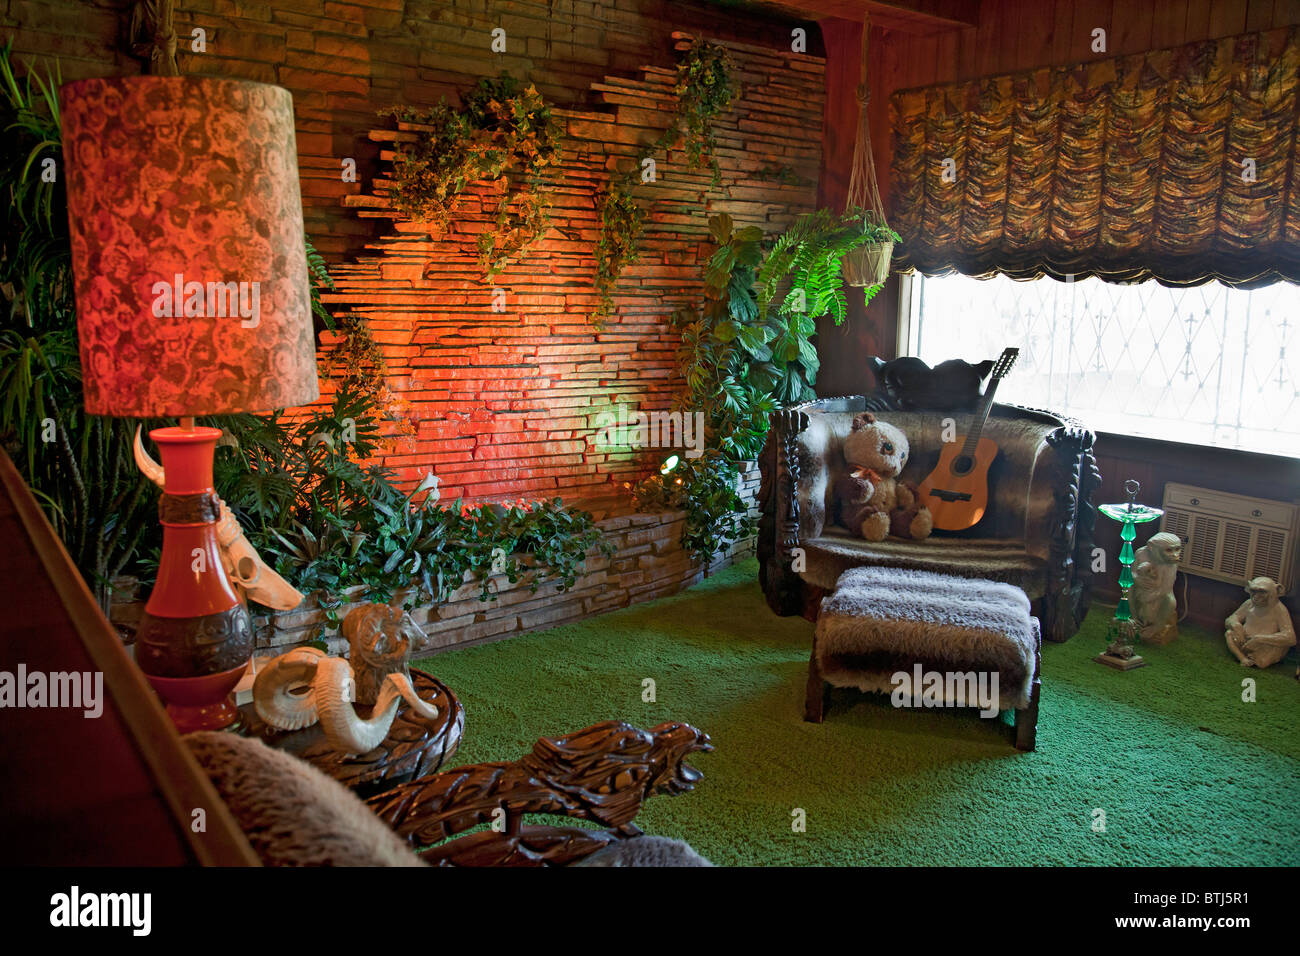 Elvis's Jungle Room at Graceland - shag pile and an African motif. The 'man room'. Stock Photo